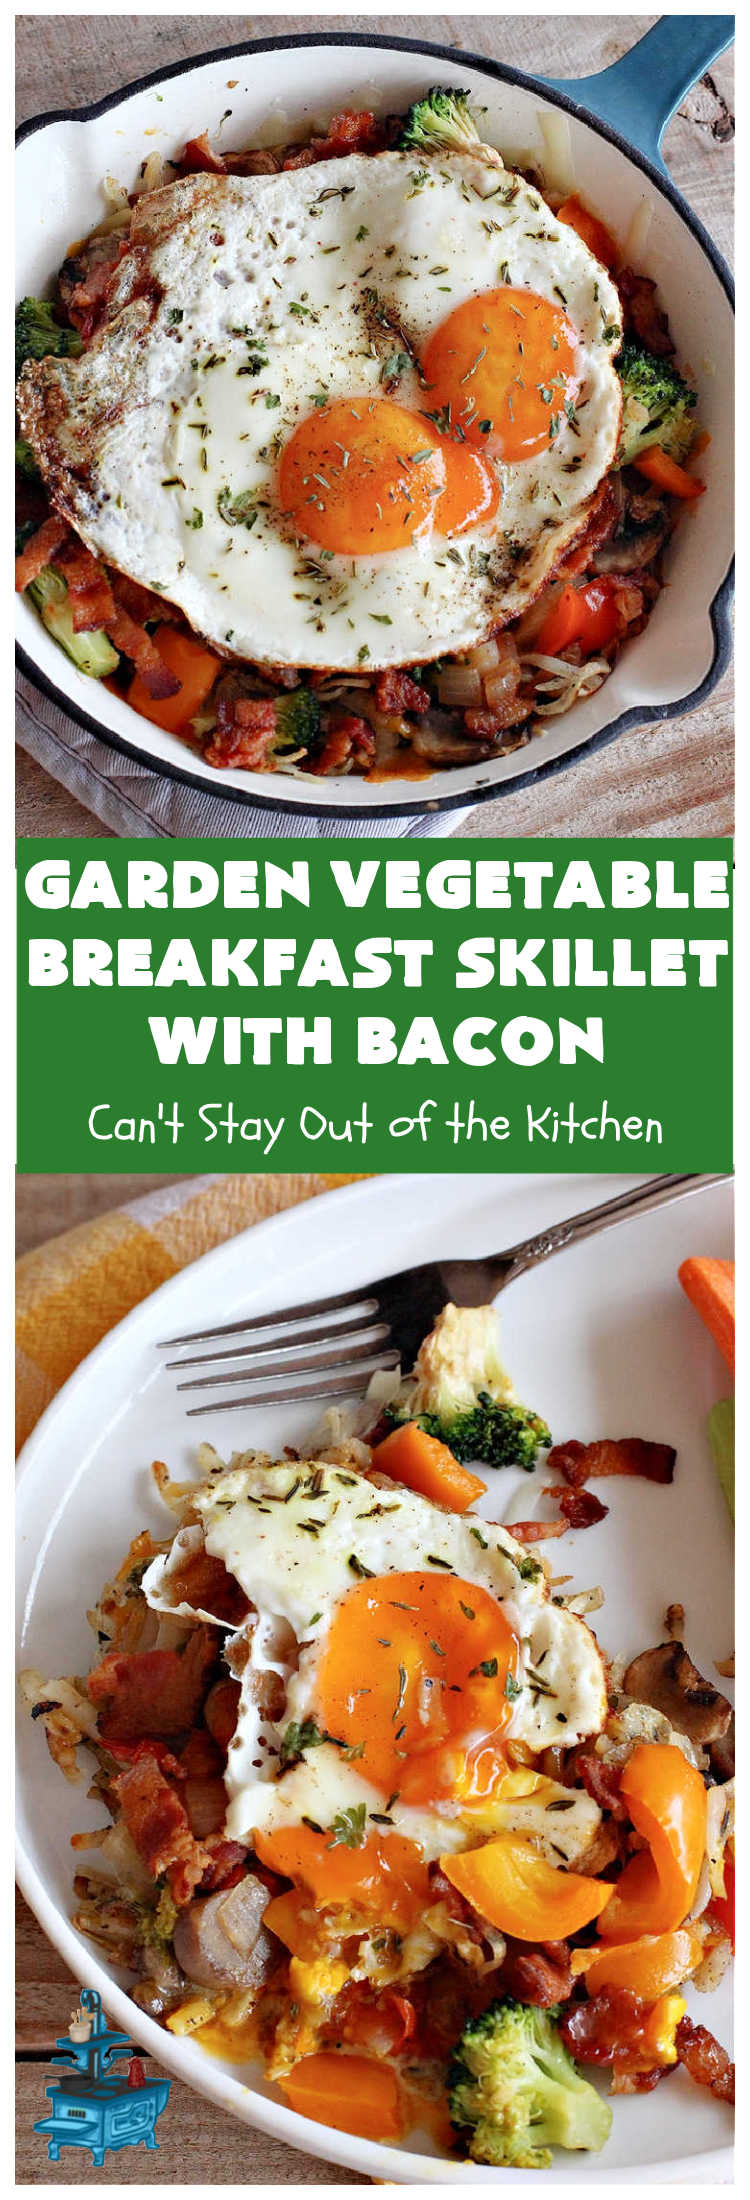 Garden Vegetable Breakfast Skillet with Bacon | Can't Stay Out of the Kitchen